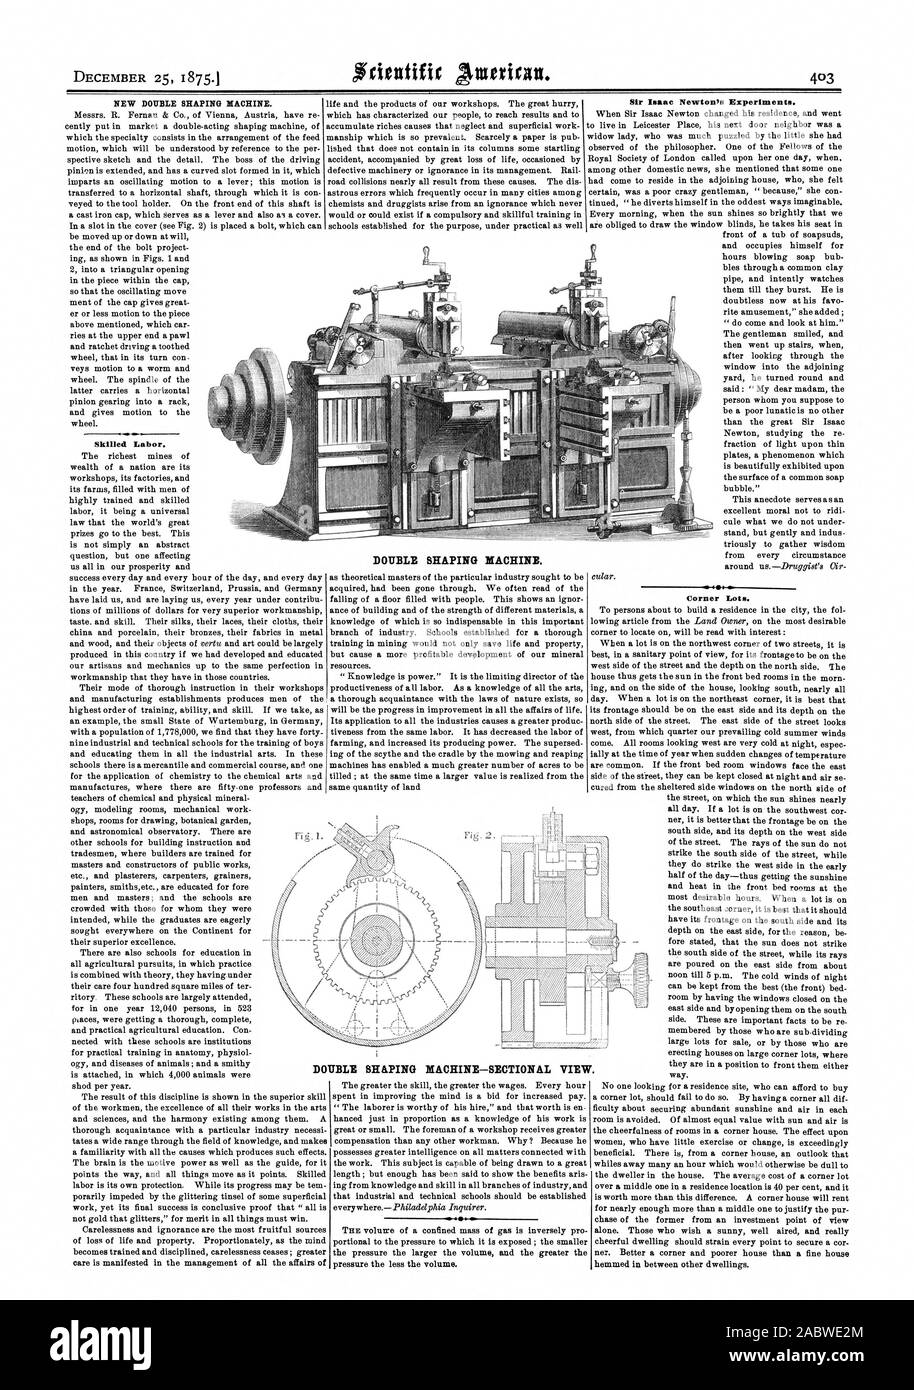 DOUBLE SHAPING MACHINE—SECTIONAL VIEW. NEW DOUBLE SHAPING MACHINE. Skilled Labor. Sir Isaac Newton's Experiments. Corner Lots. DOUBLE SHAPING MACHINE. P., scientific american, 1875-12-25 Stock Photo